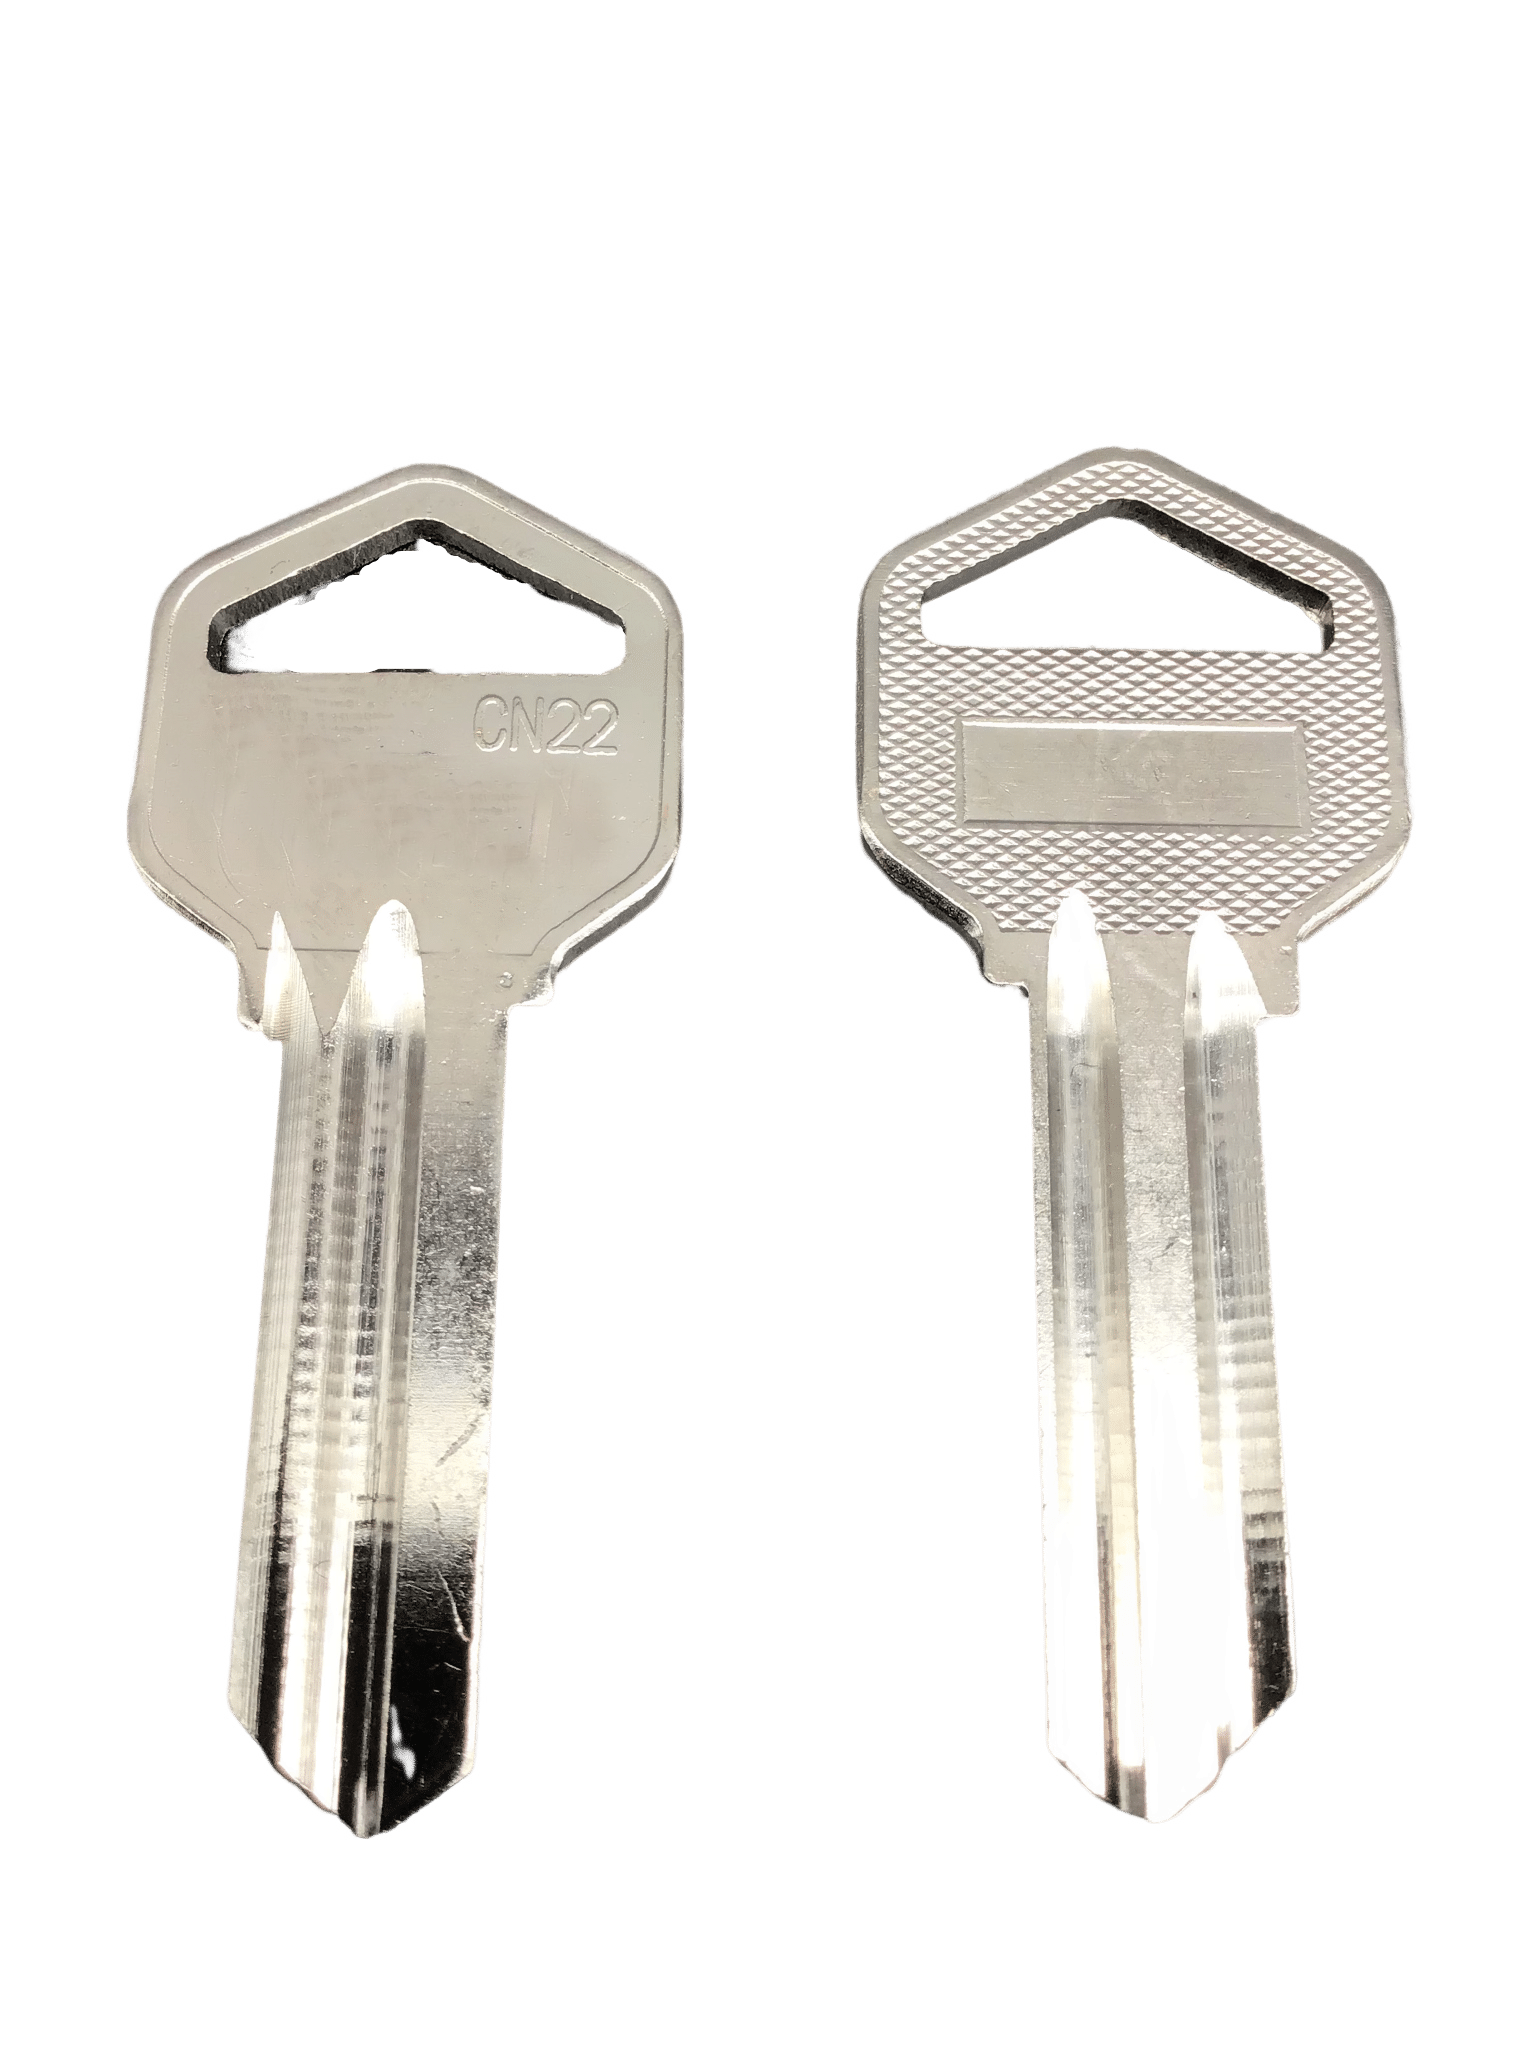 CN22 key blank front and back